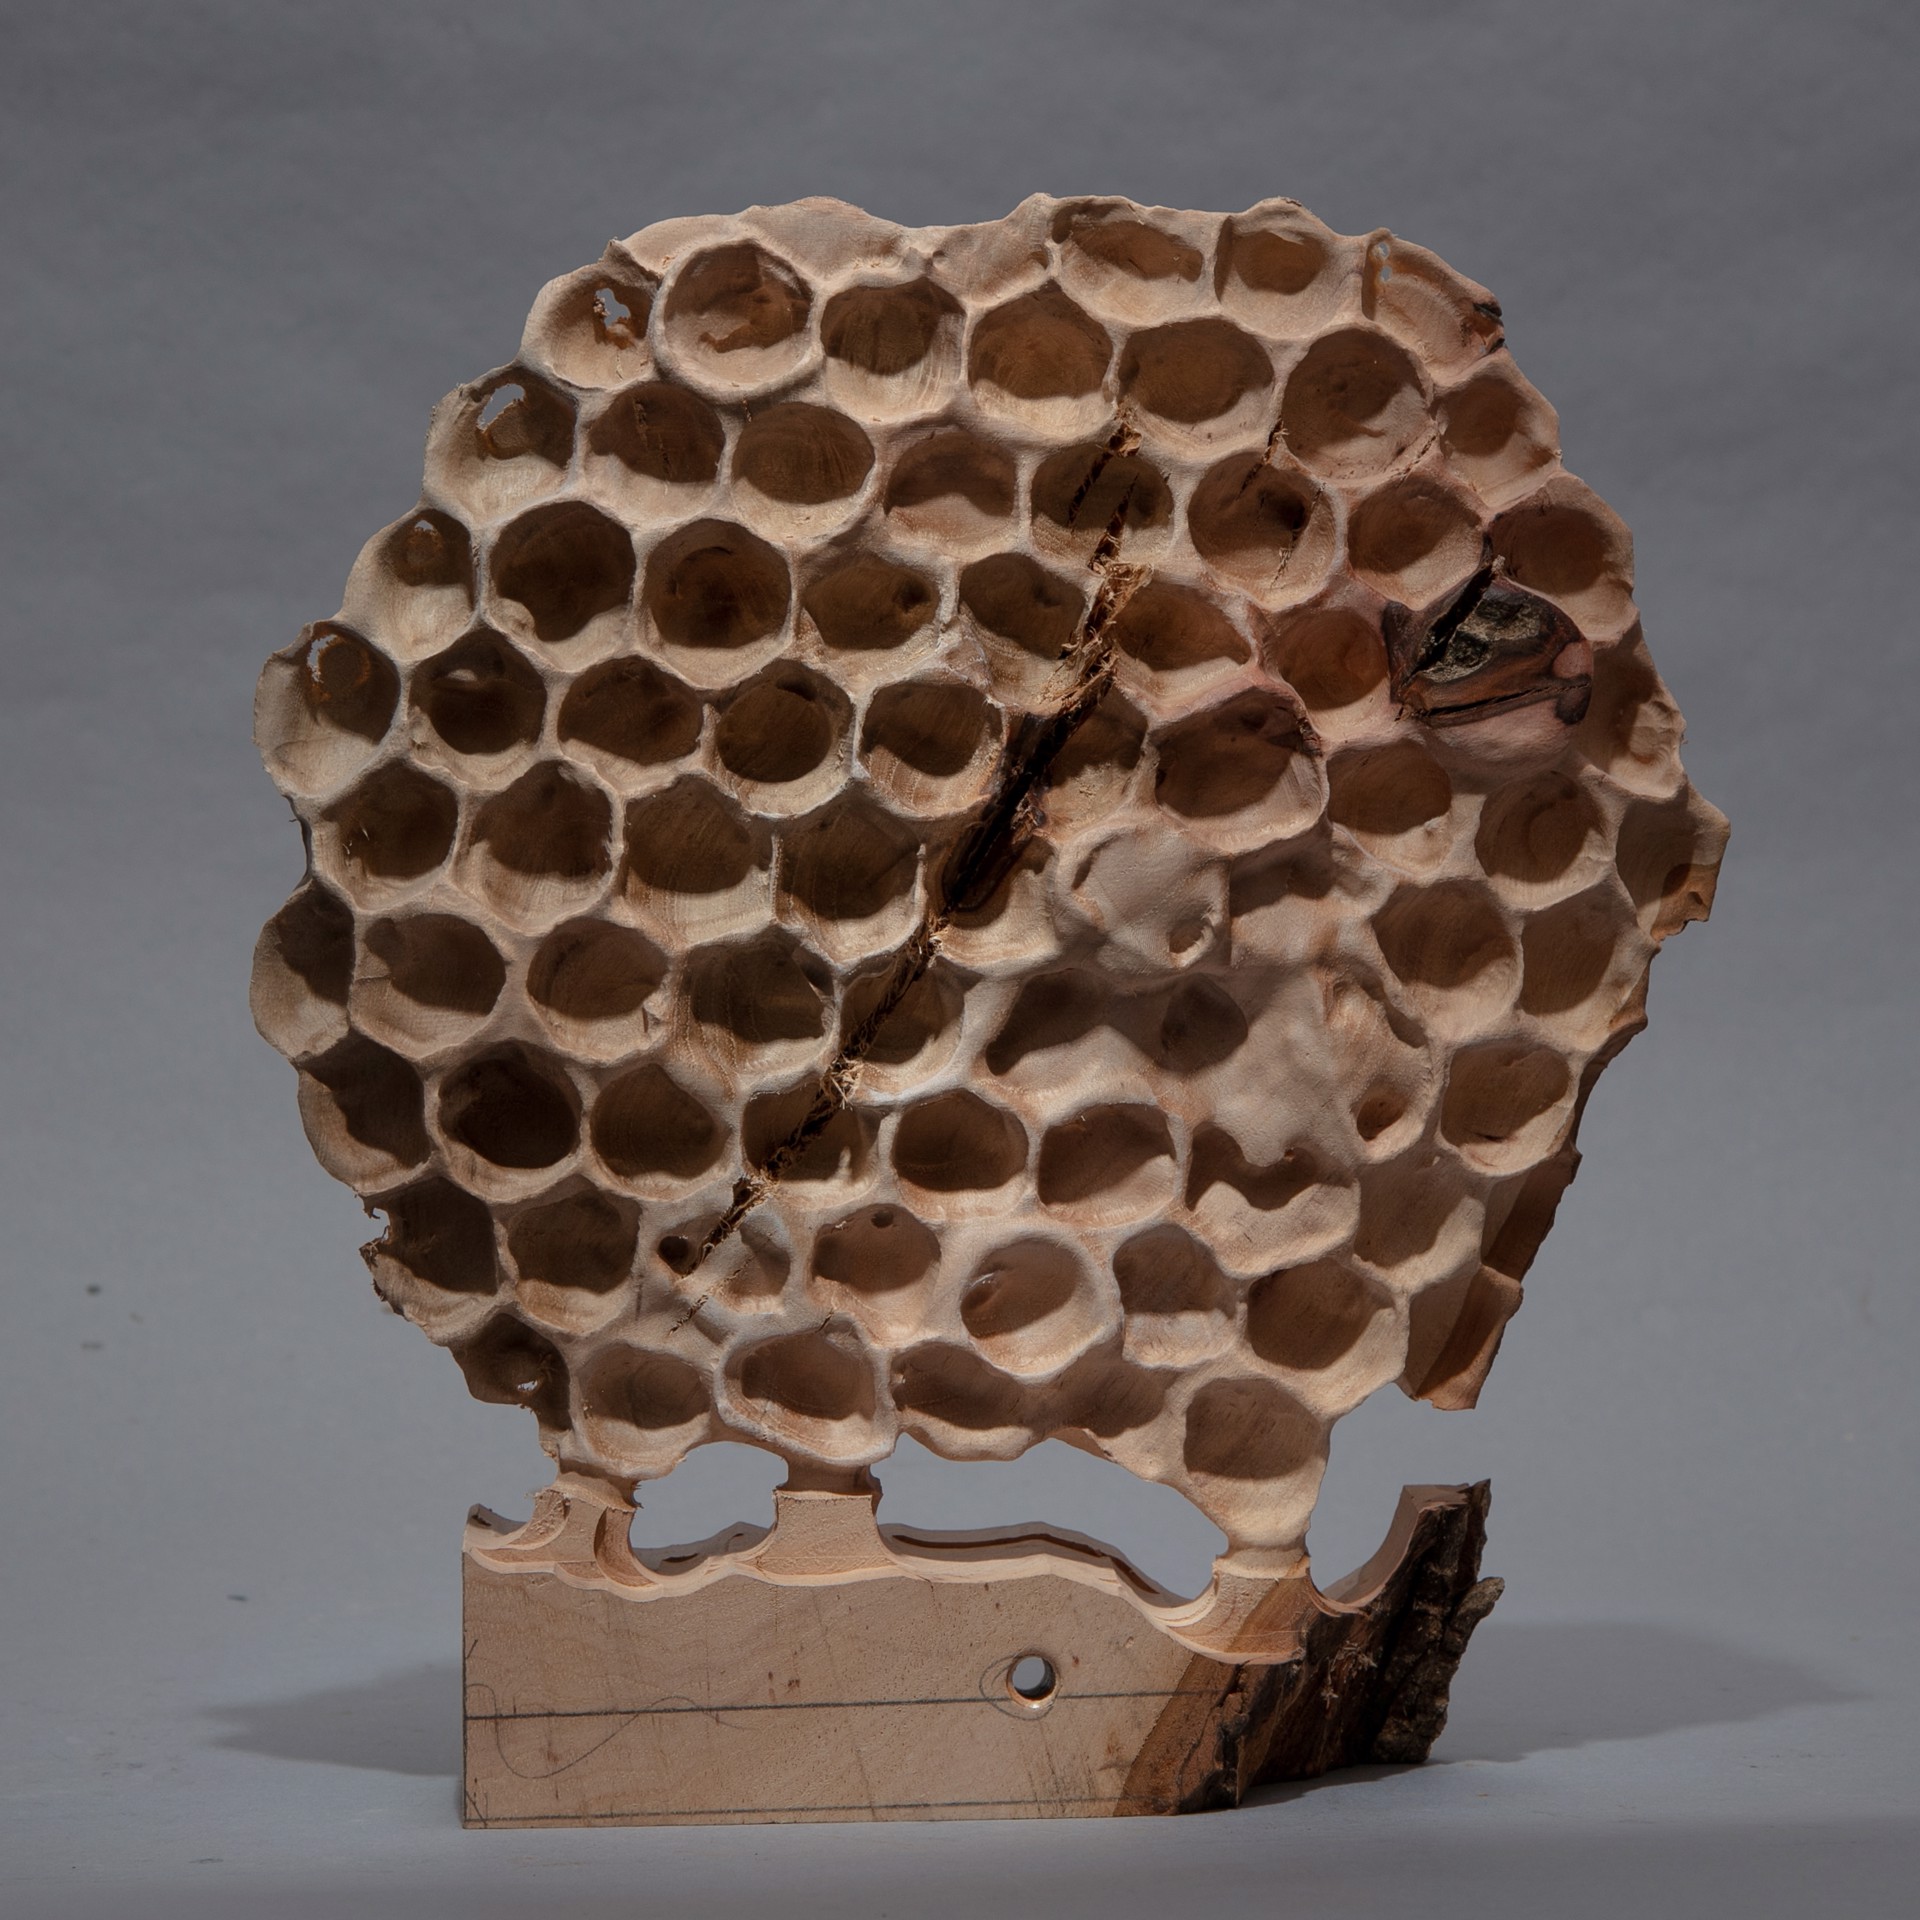 SOLD, Specimen #7 - Wasp's nest in local pecan by Dana Younger